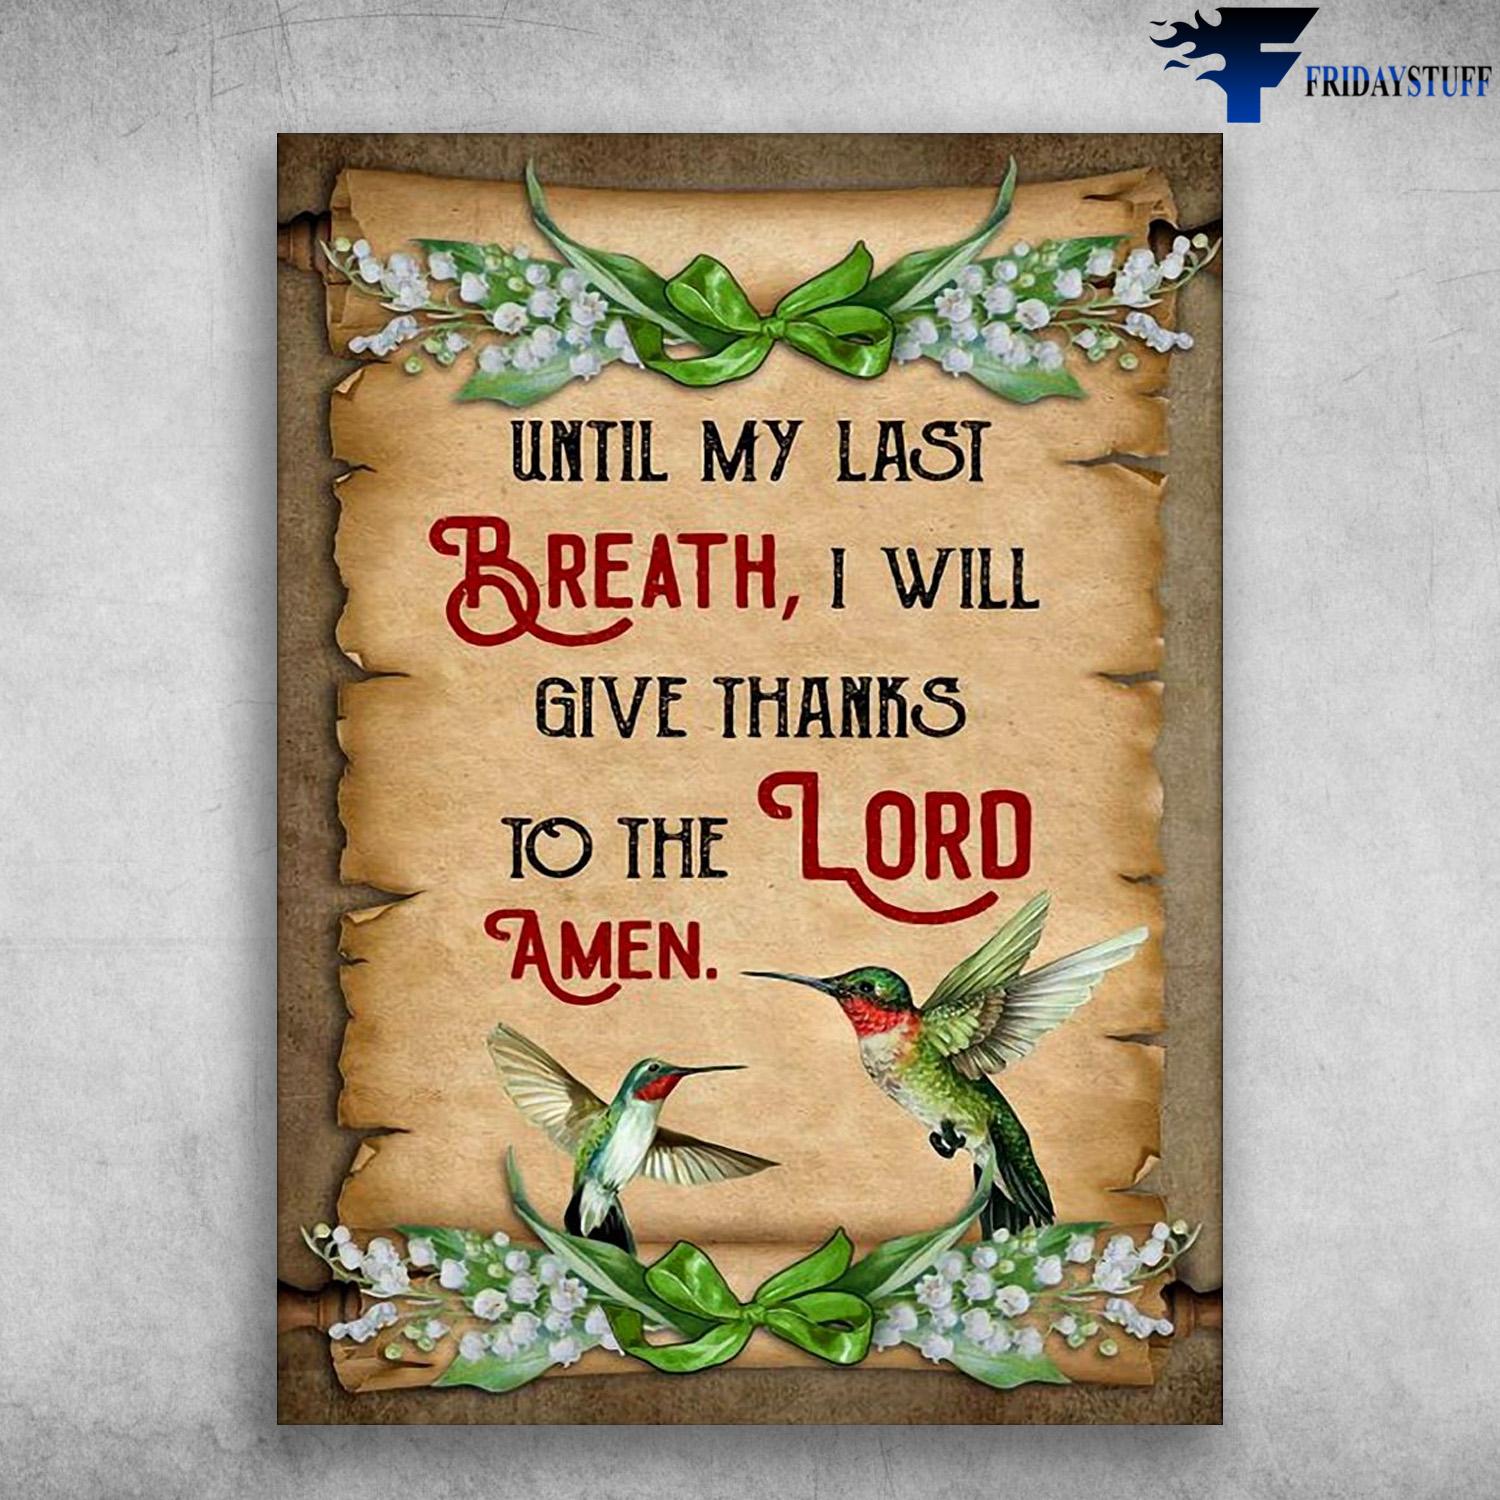 Hummingbird Poster - Until My Last Breath, I Will Give Thanks To The Lord, Amen